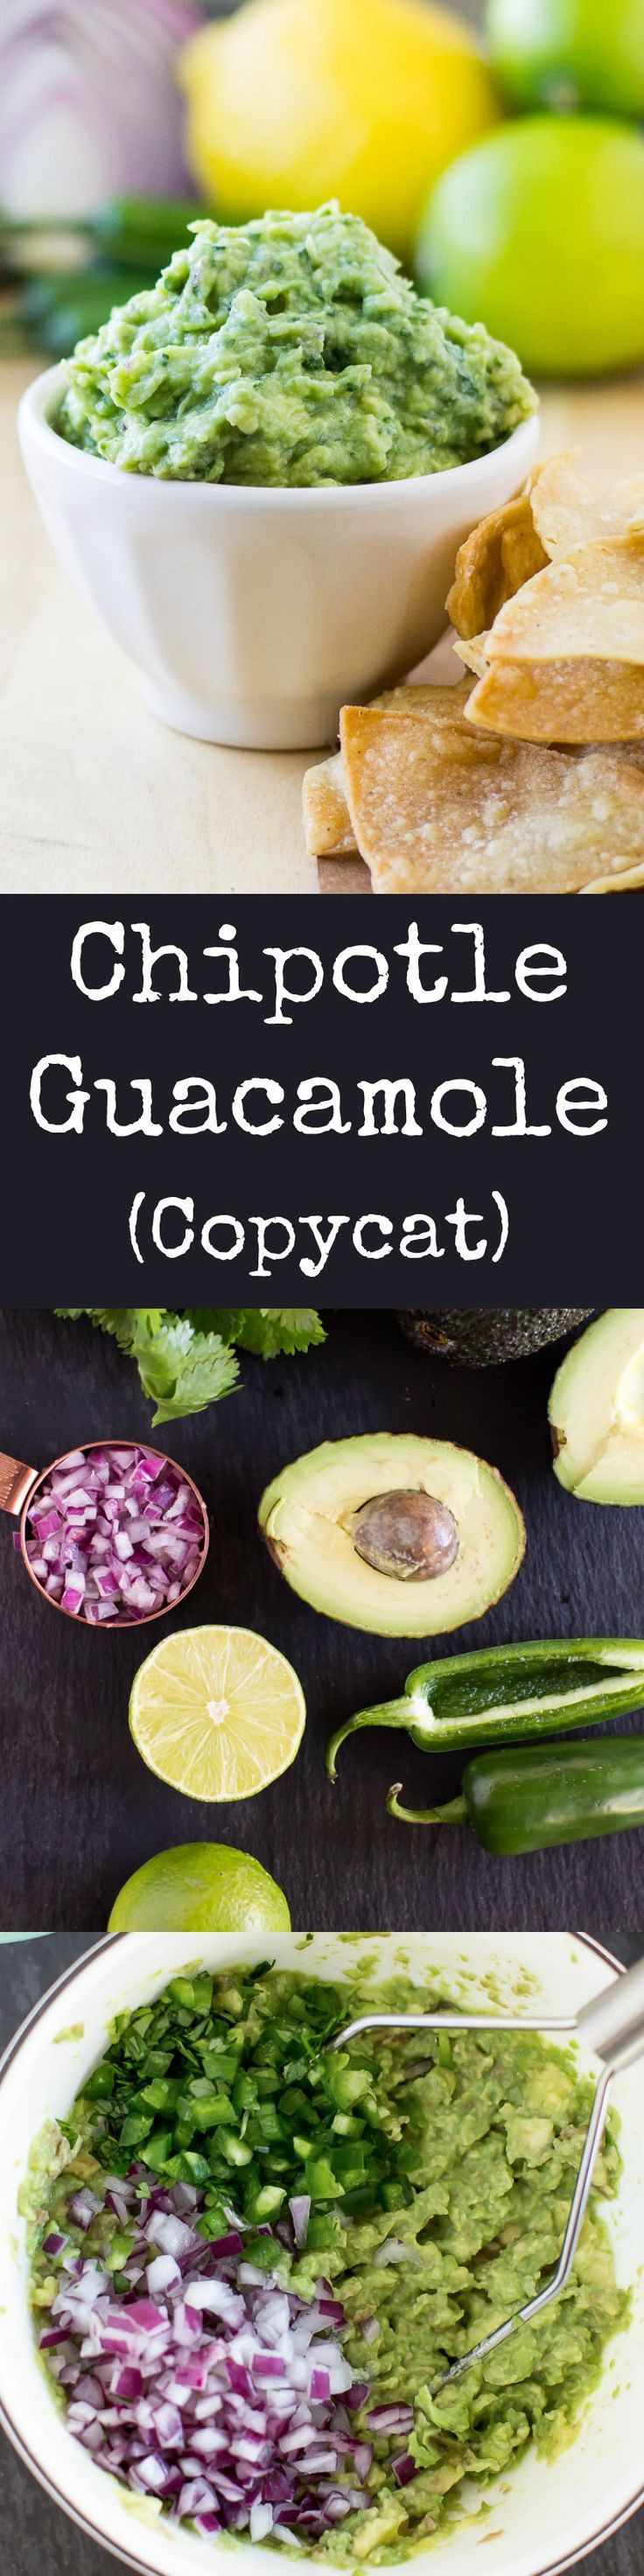 Is Chipotle Guacamole Healthy 20 Of the Best Ideas for Healthy Recipes This Chipotle Guacamole Recipe is the